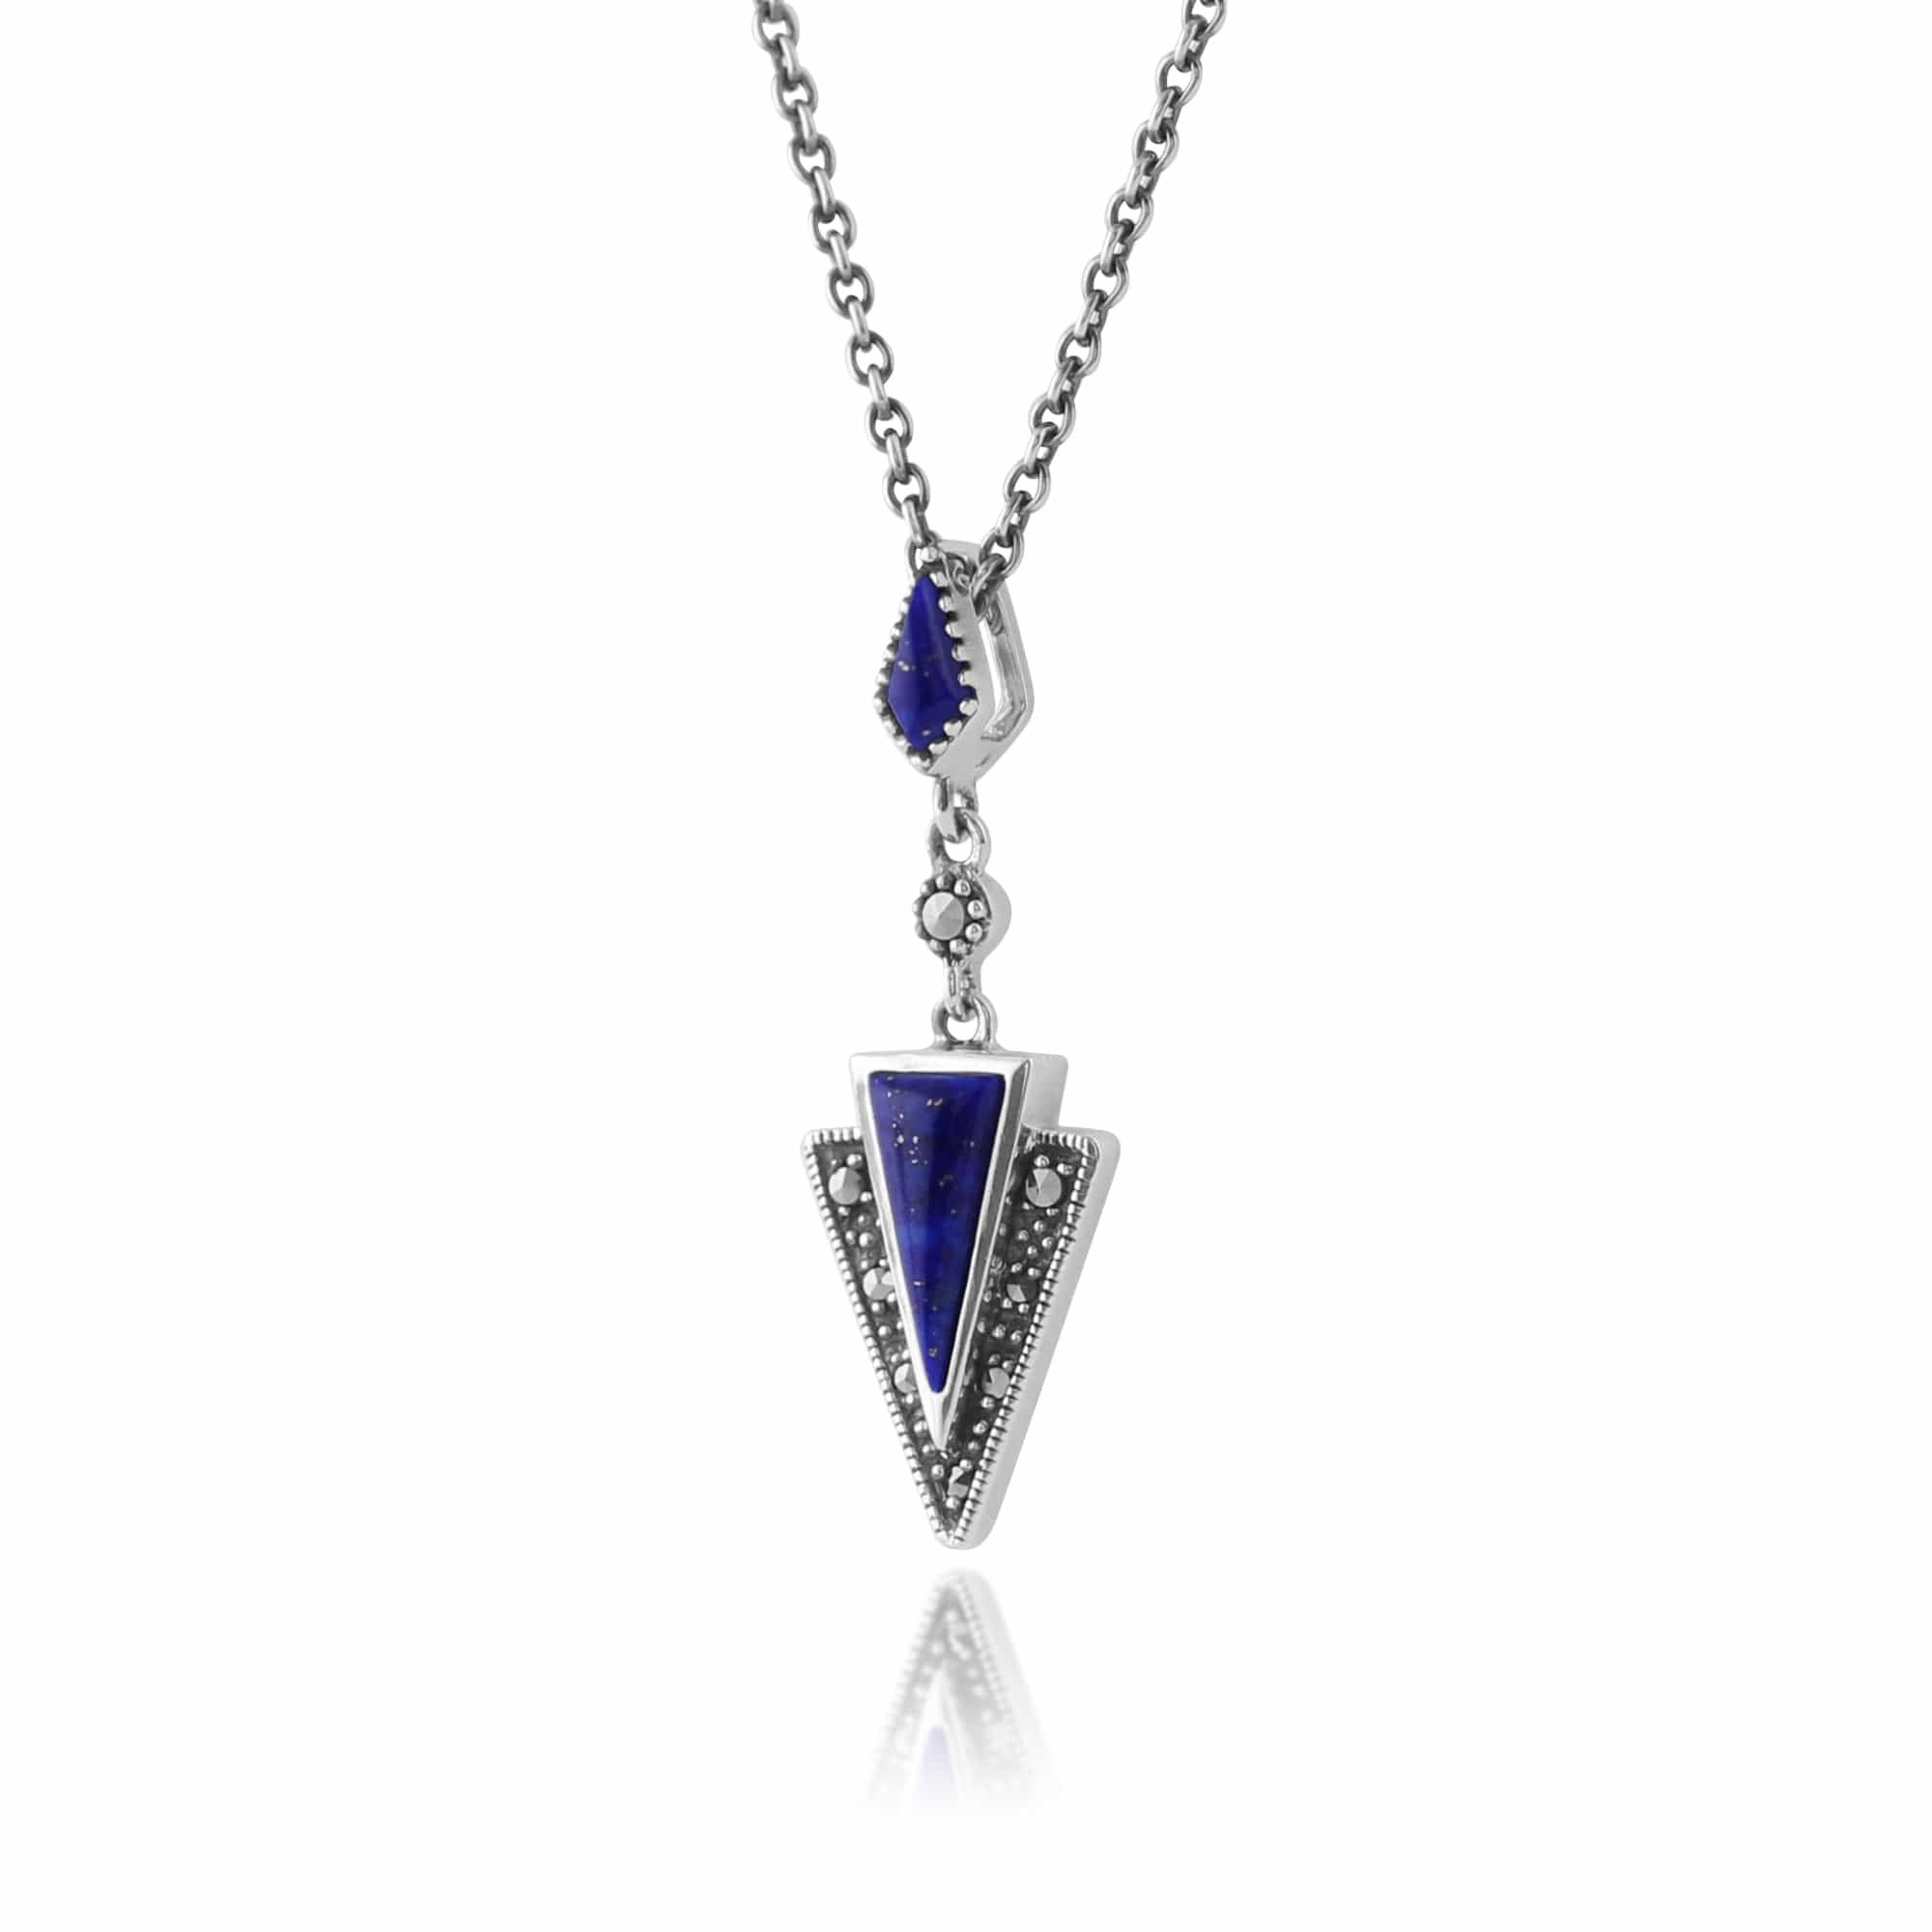 214N658303925 Art Deco Style Lapis Lazuli & Marcasite Pendant in 925 Sterling Silver 2